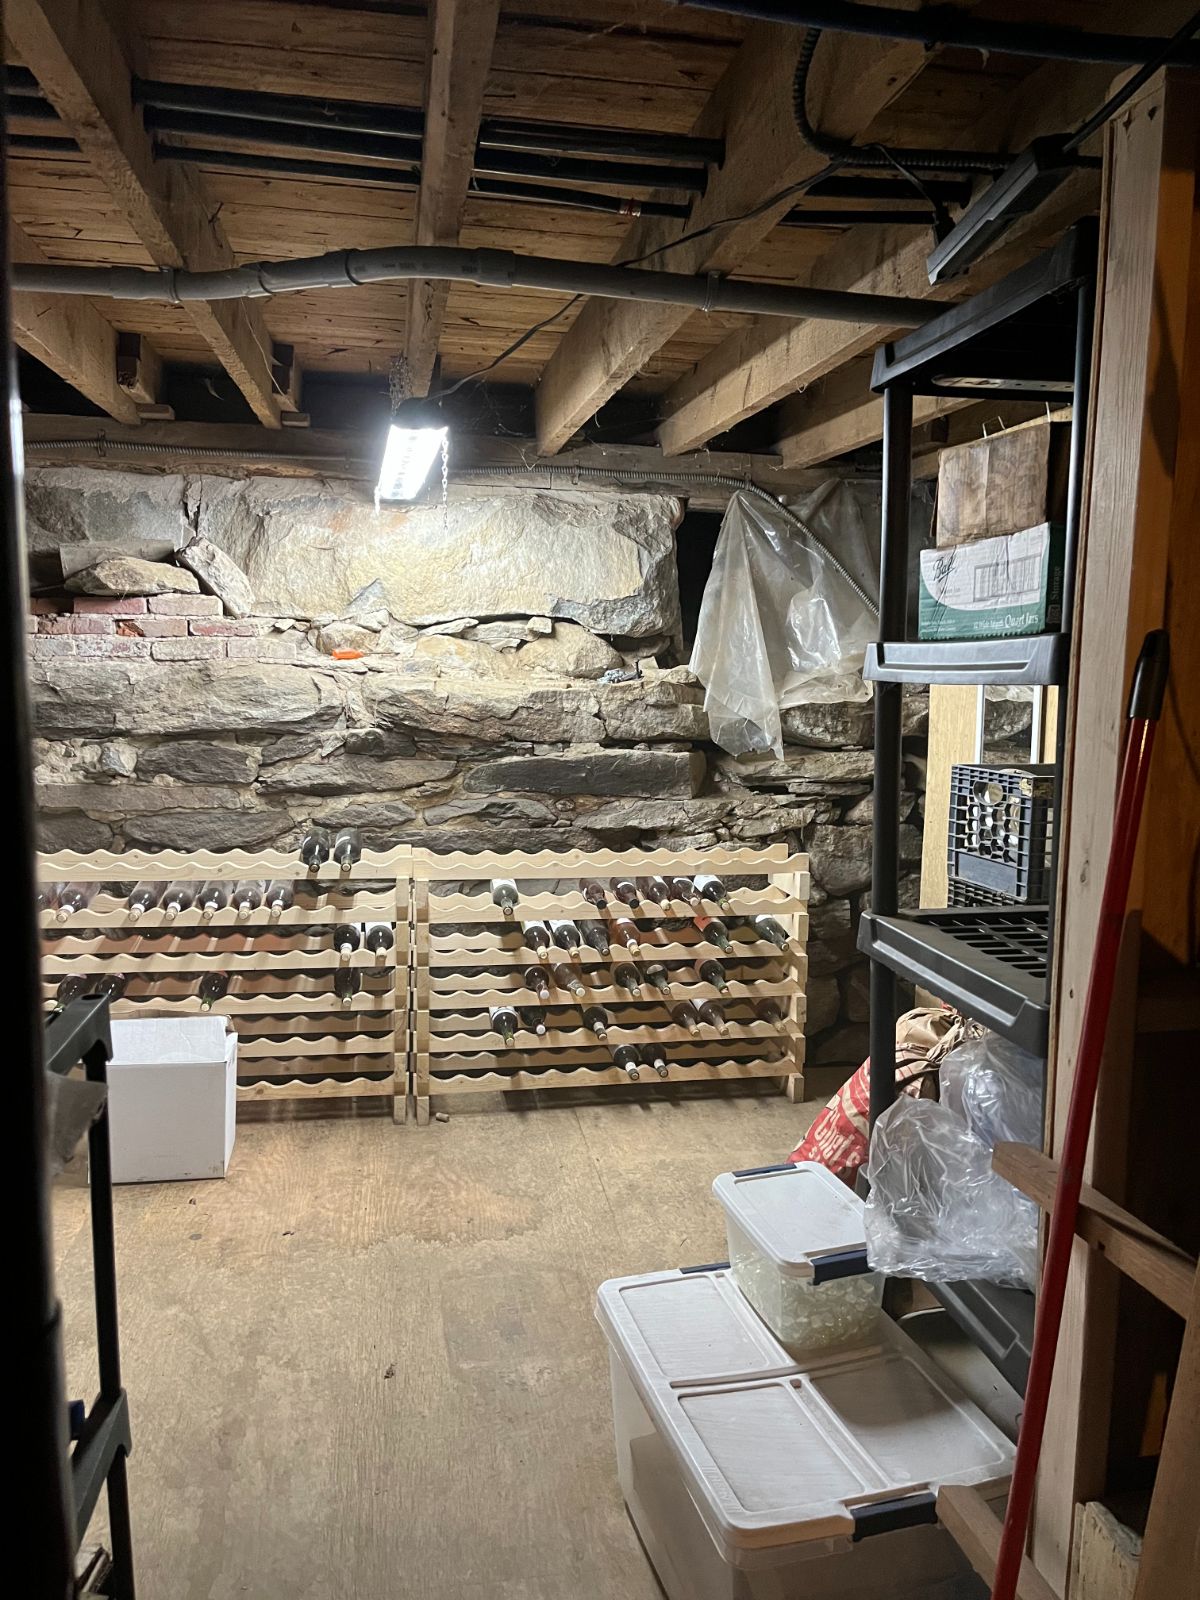 A cold storage room in a house basement